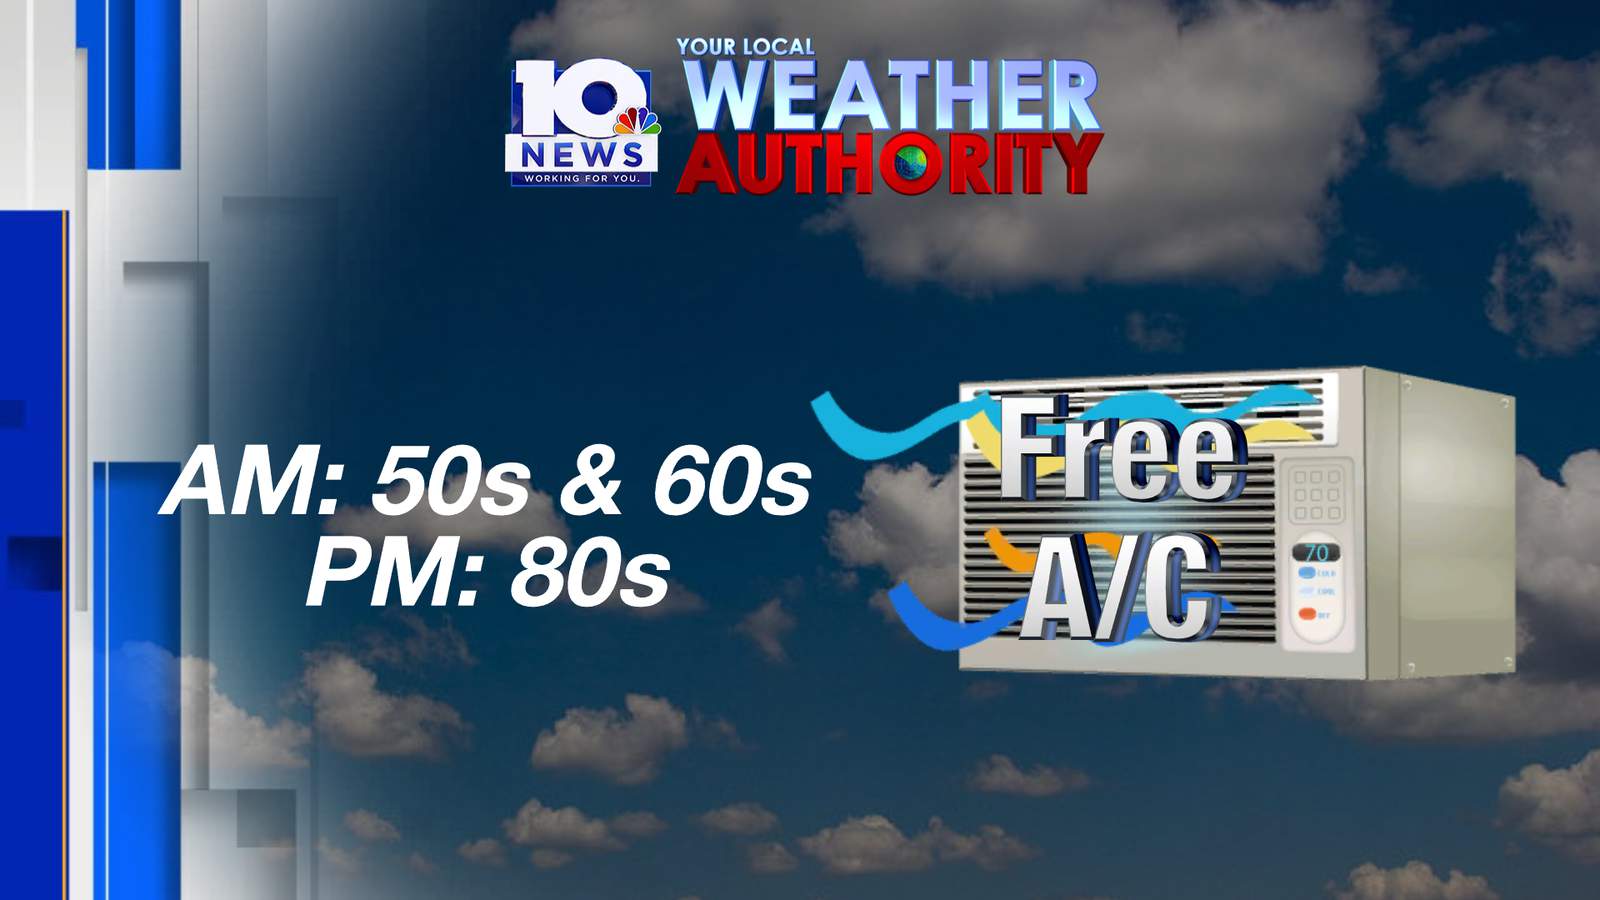 Free A/C Tuesday morning followed by typical afternoon temperatures